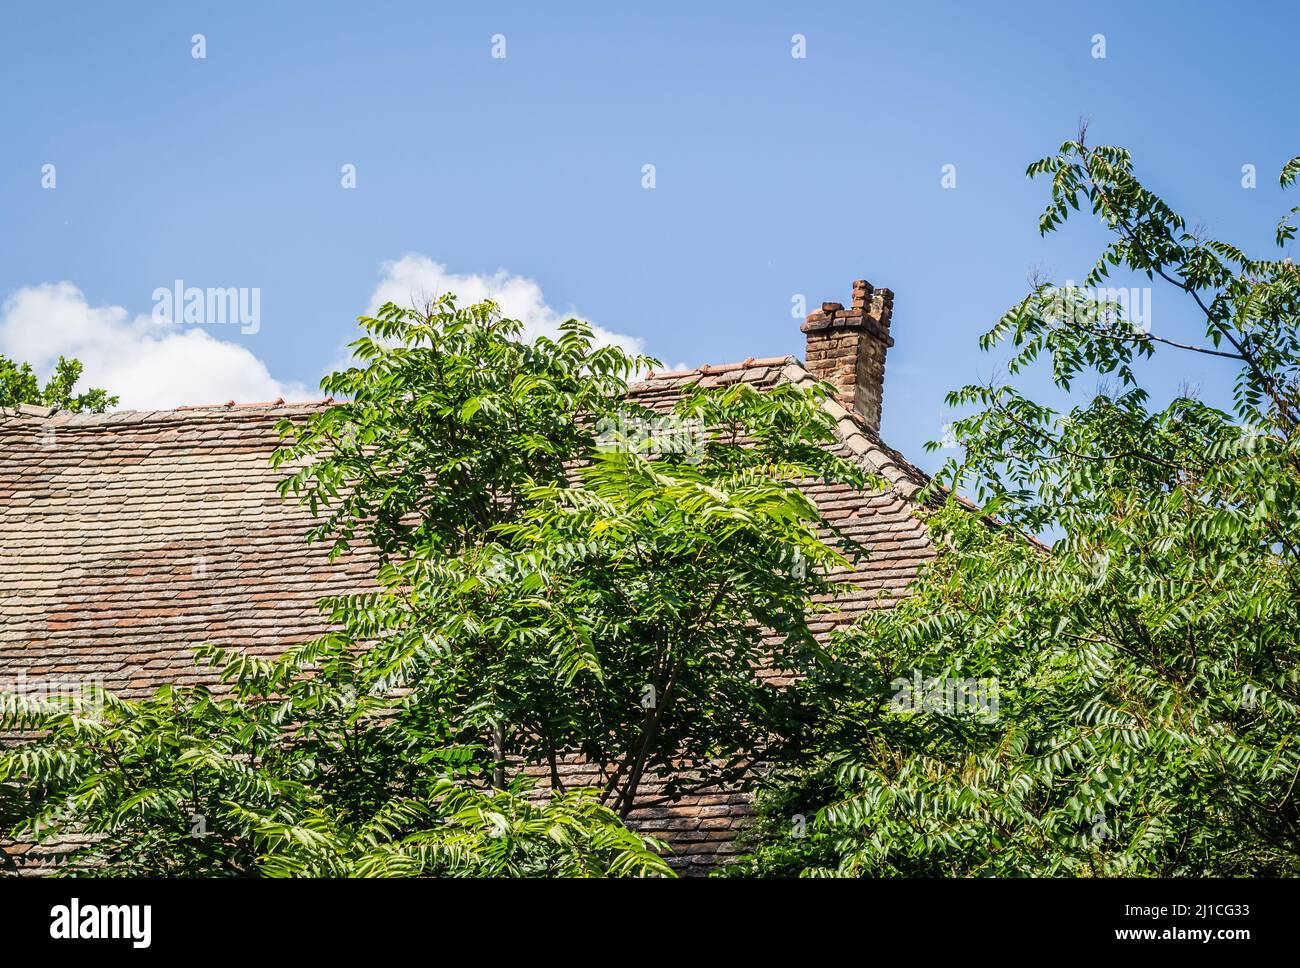 Roofs of houses, covered with old tiles with dilapidated chimneys. Stock Photo